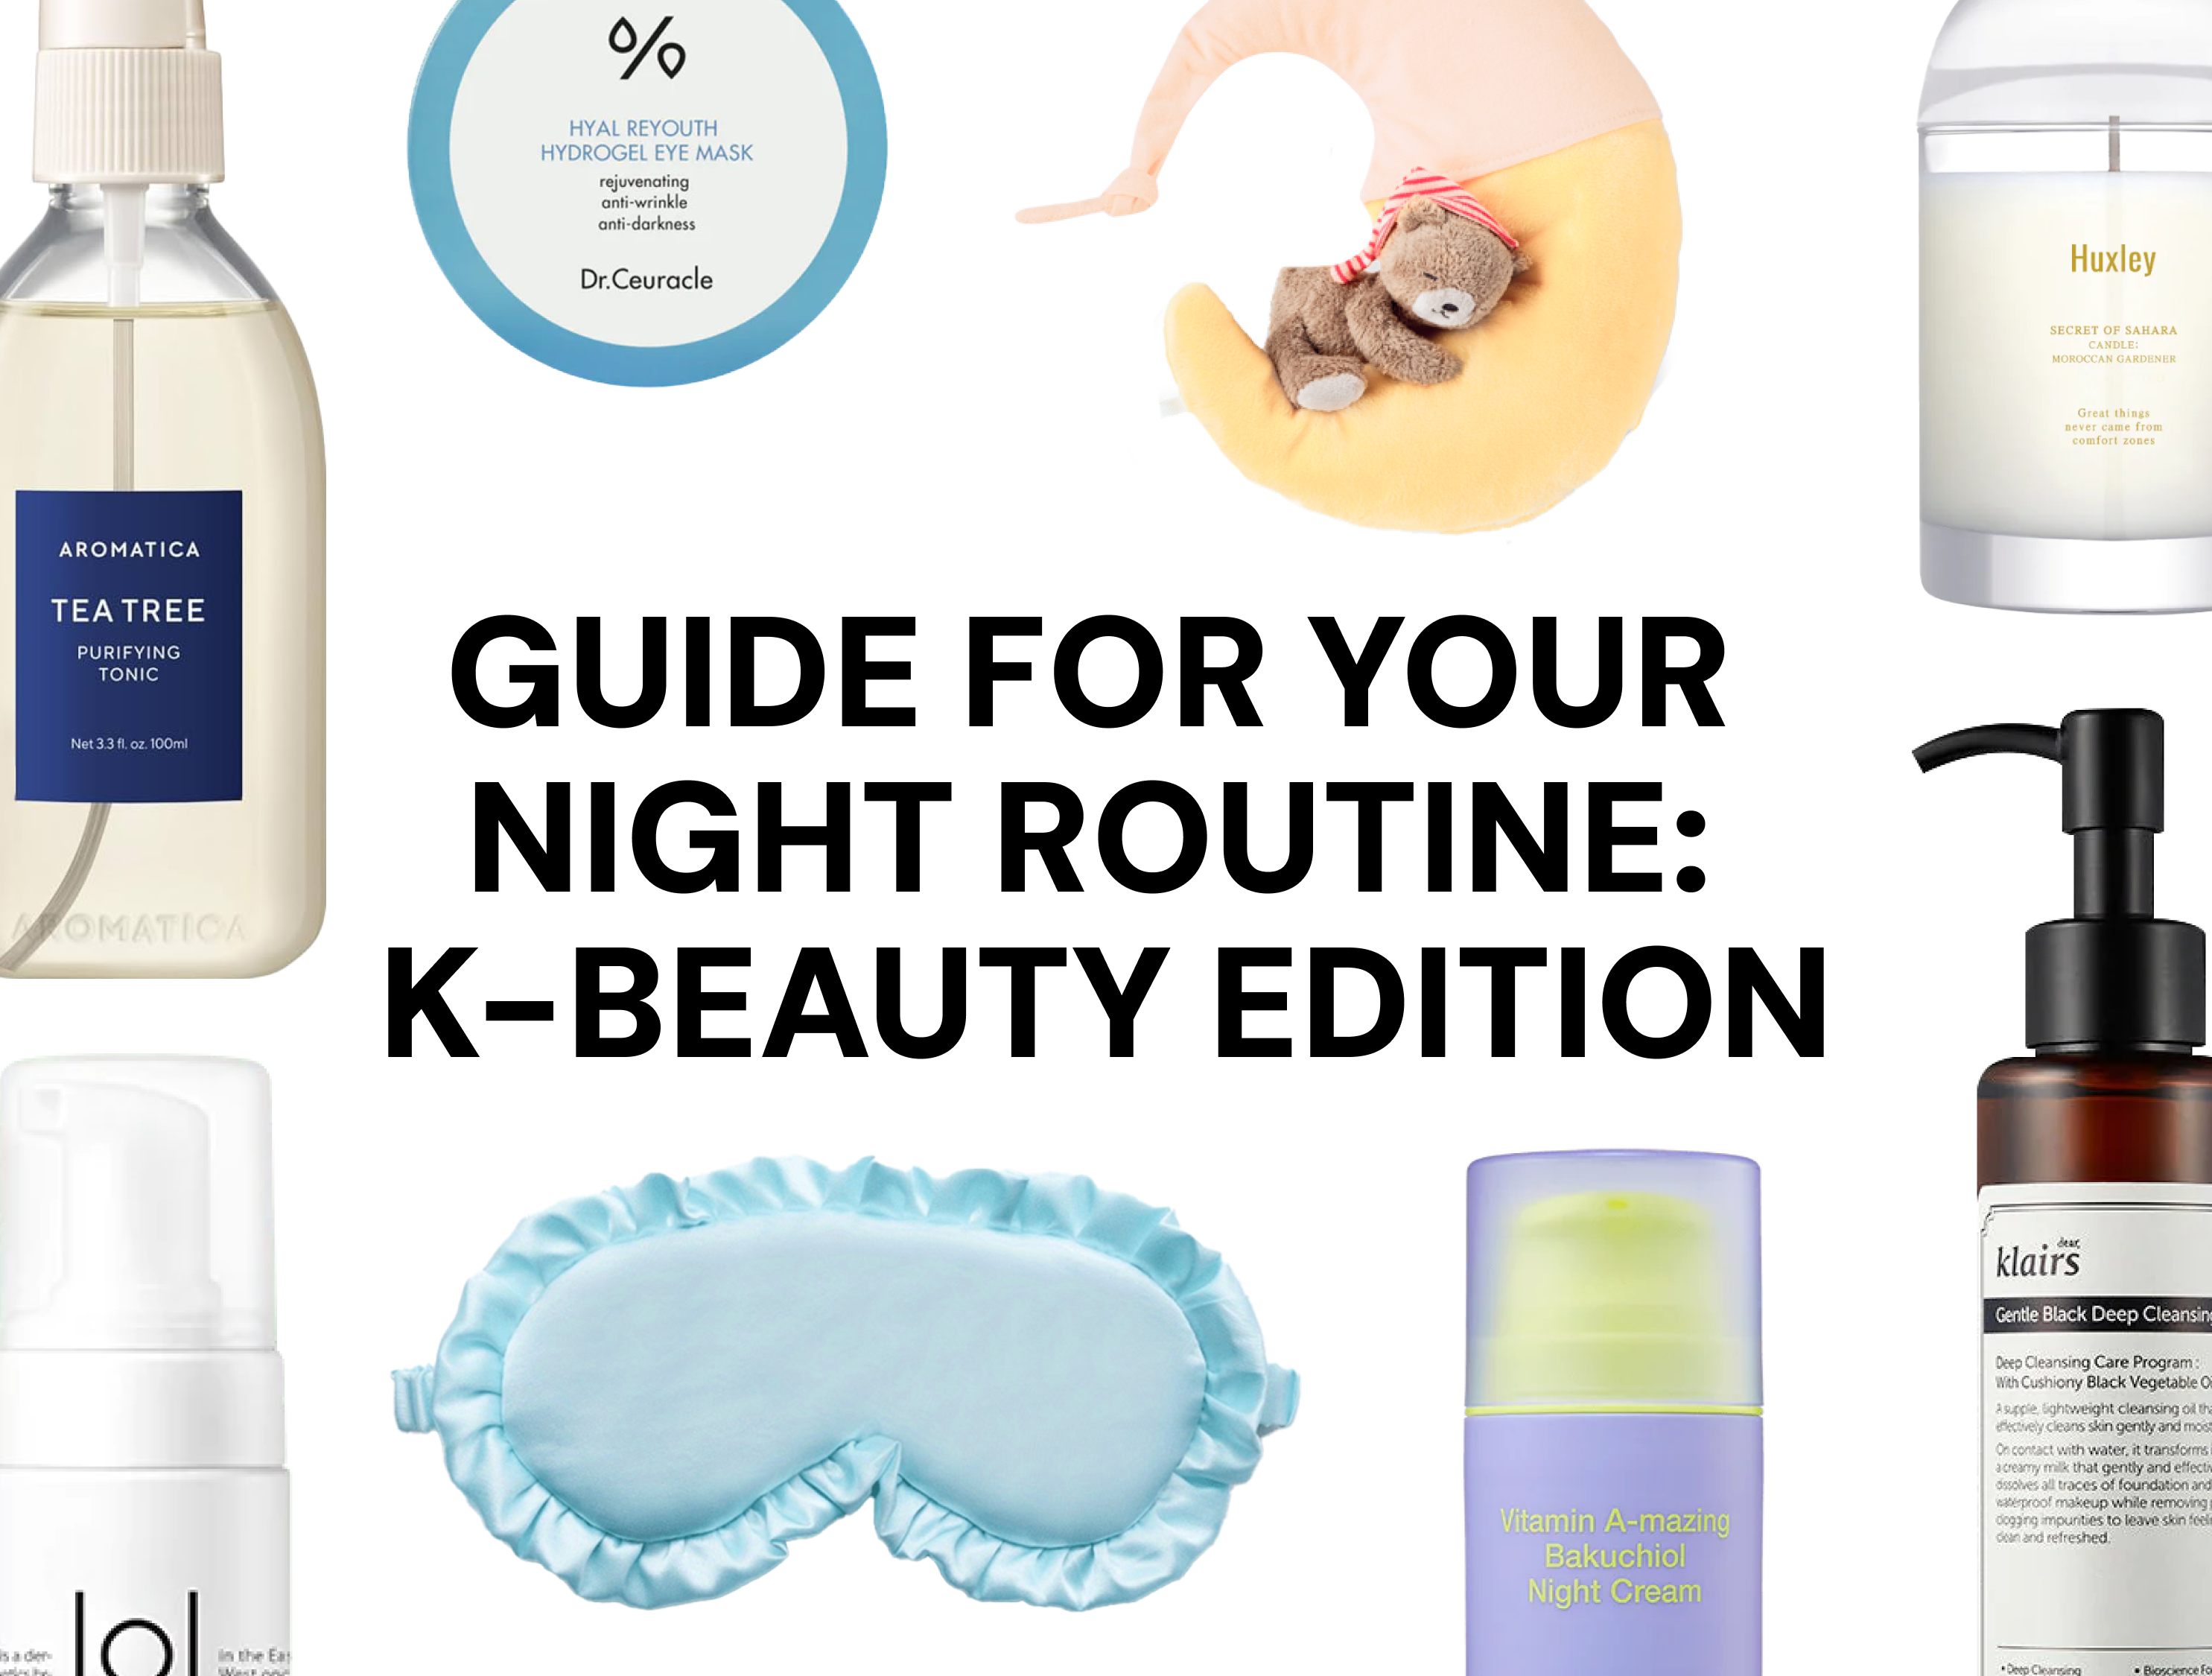 The ultimate guide for your night routine: K-beauty edition